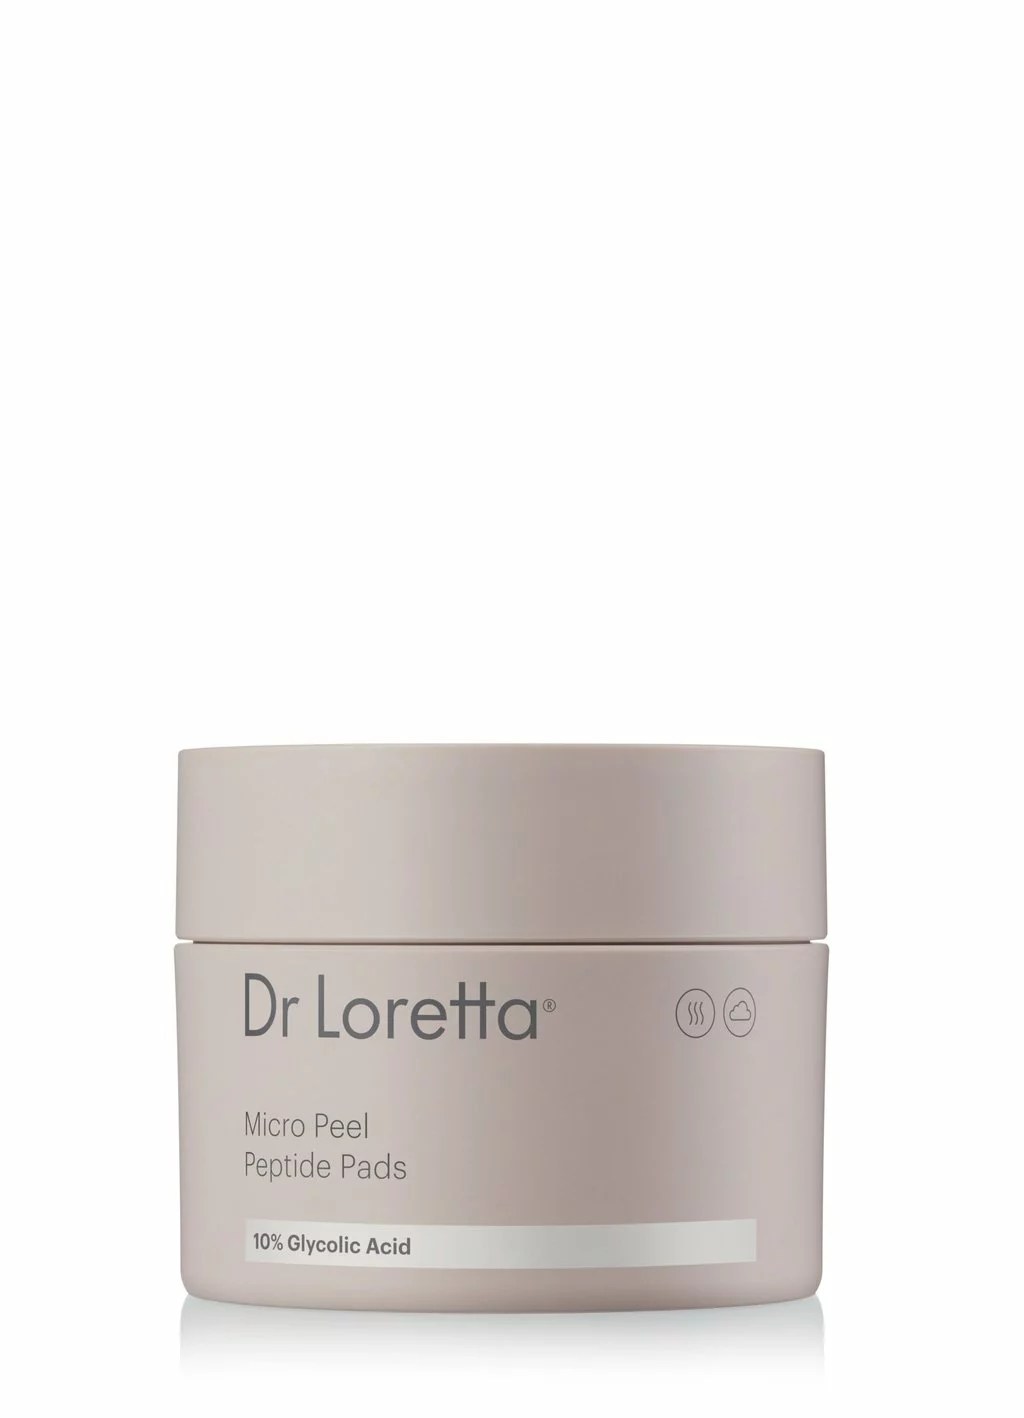 Dr. Loretta Micro Peel Peptide Pads, effects of hard water on skin and hair